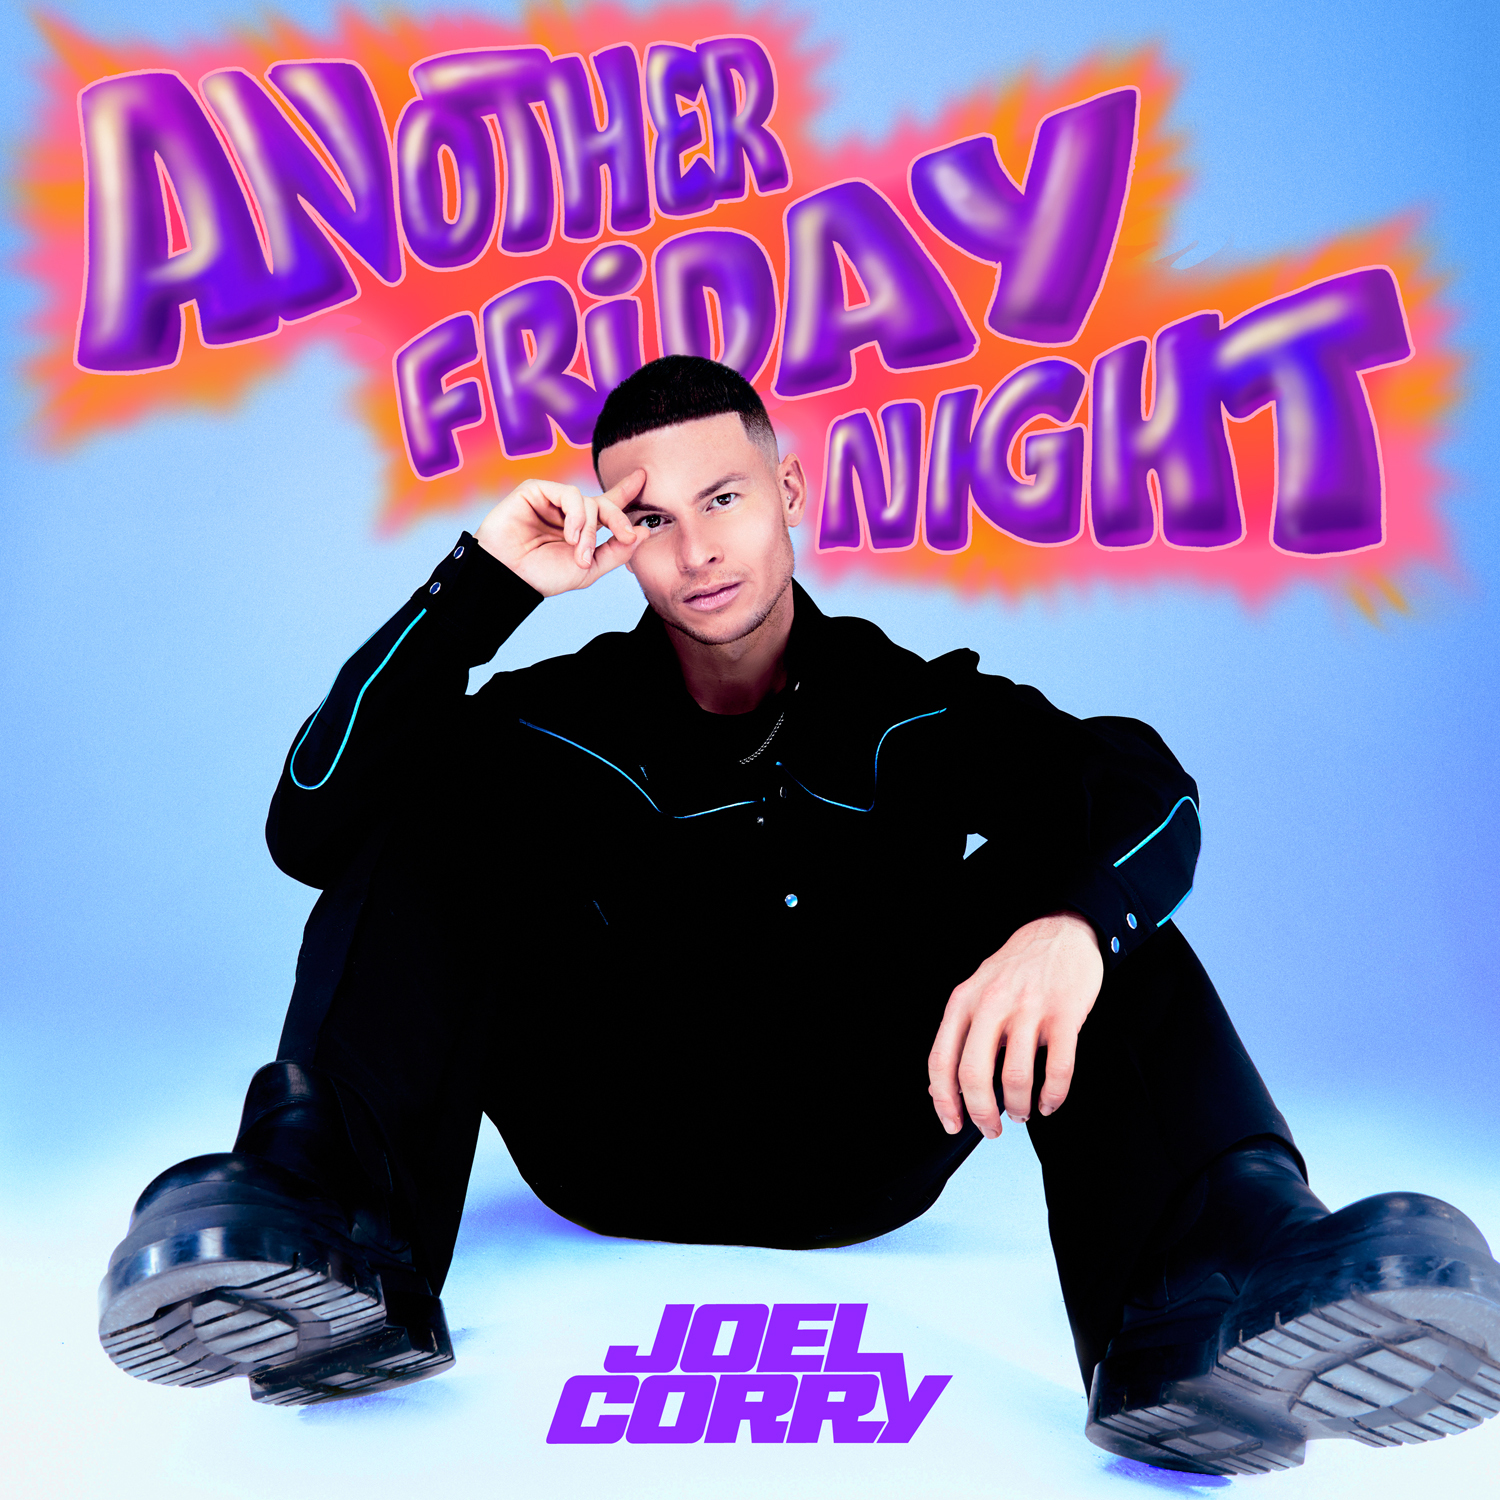 JOEL CORRY ANNOUNCES DEBUT ALBUM “ANOTHER FRIDAY NIGHT” COMING OCTOBER 6TH